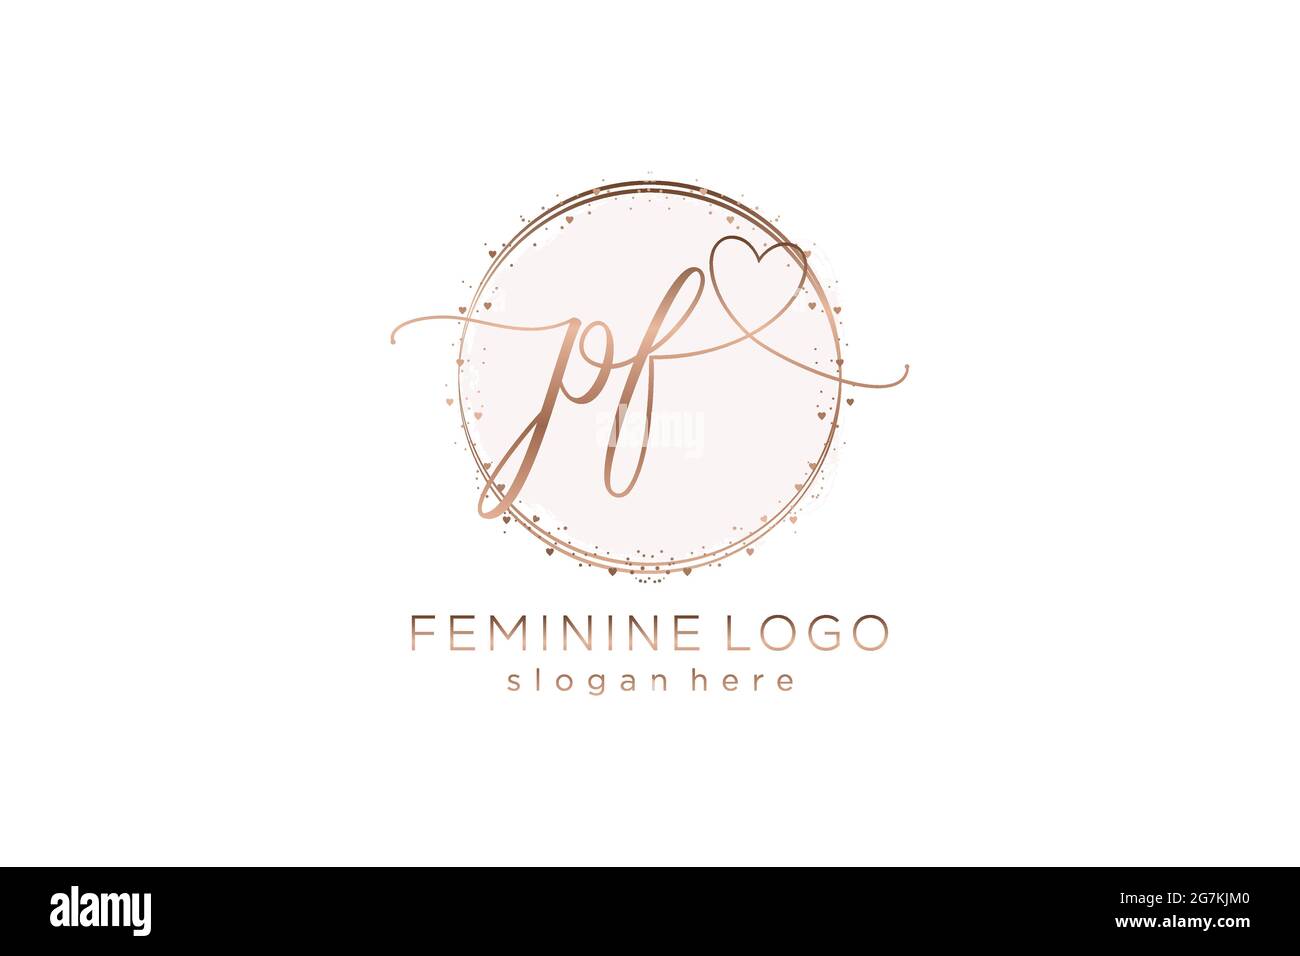 PR handwriting logo with circle template vector logo of initial wedding, fashion, floral and botanical with creative template. Stock Vector